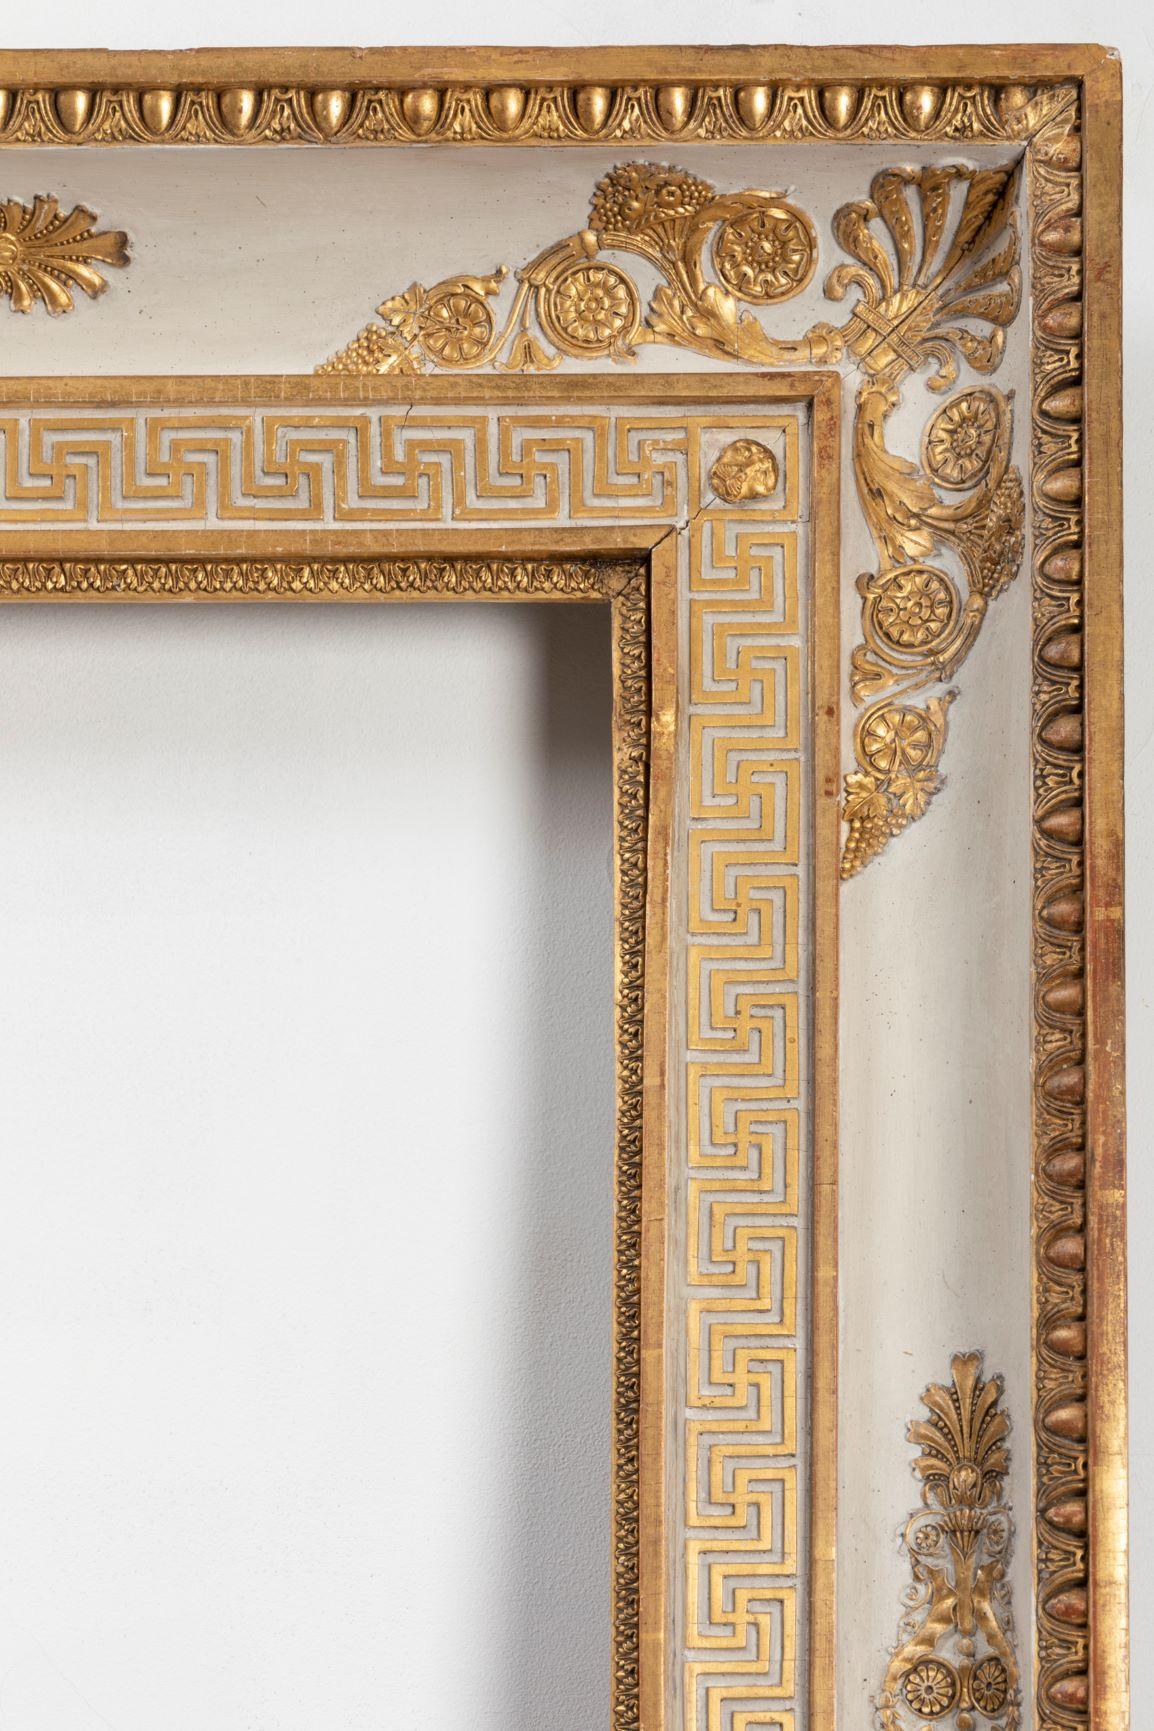 Splendid French Empire Carved Giltwood Frame or Mirror France Early 19th Century For Sale 3